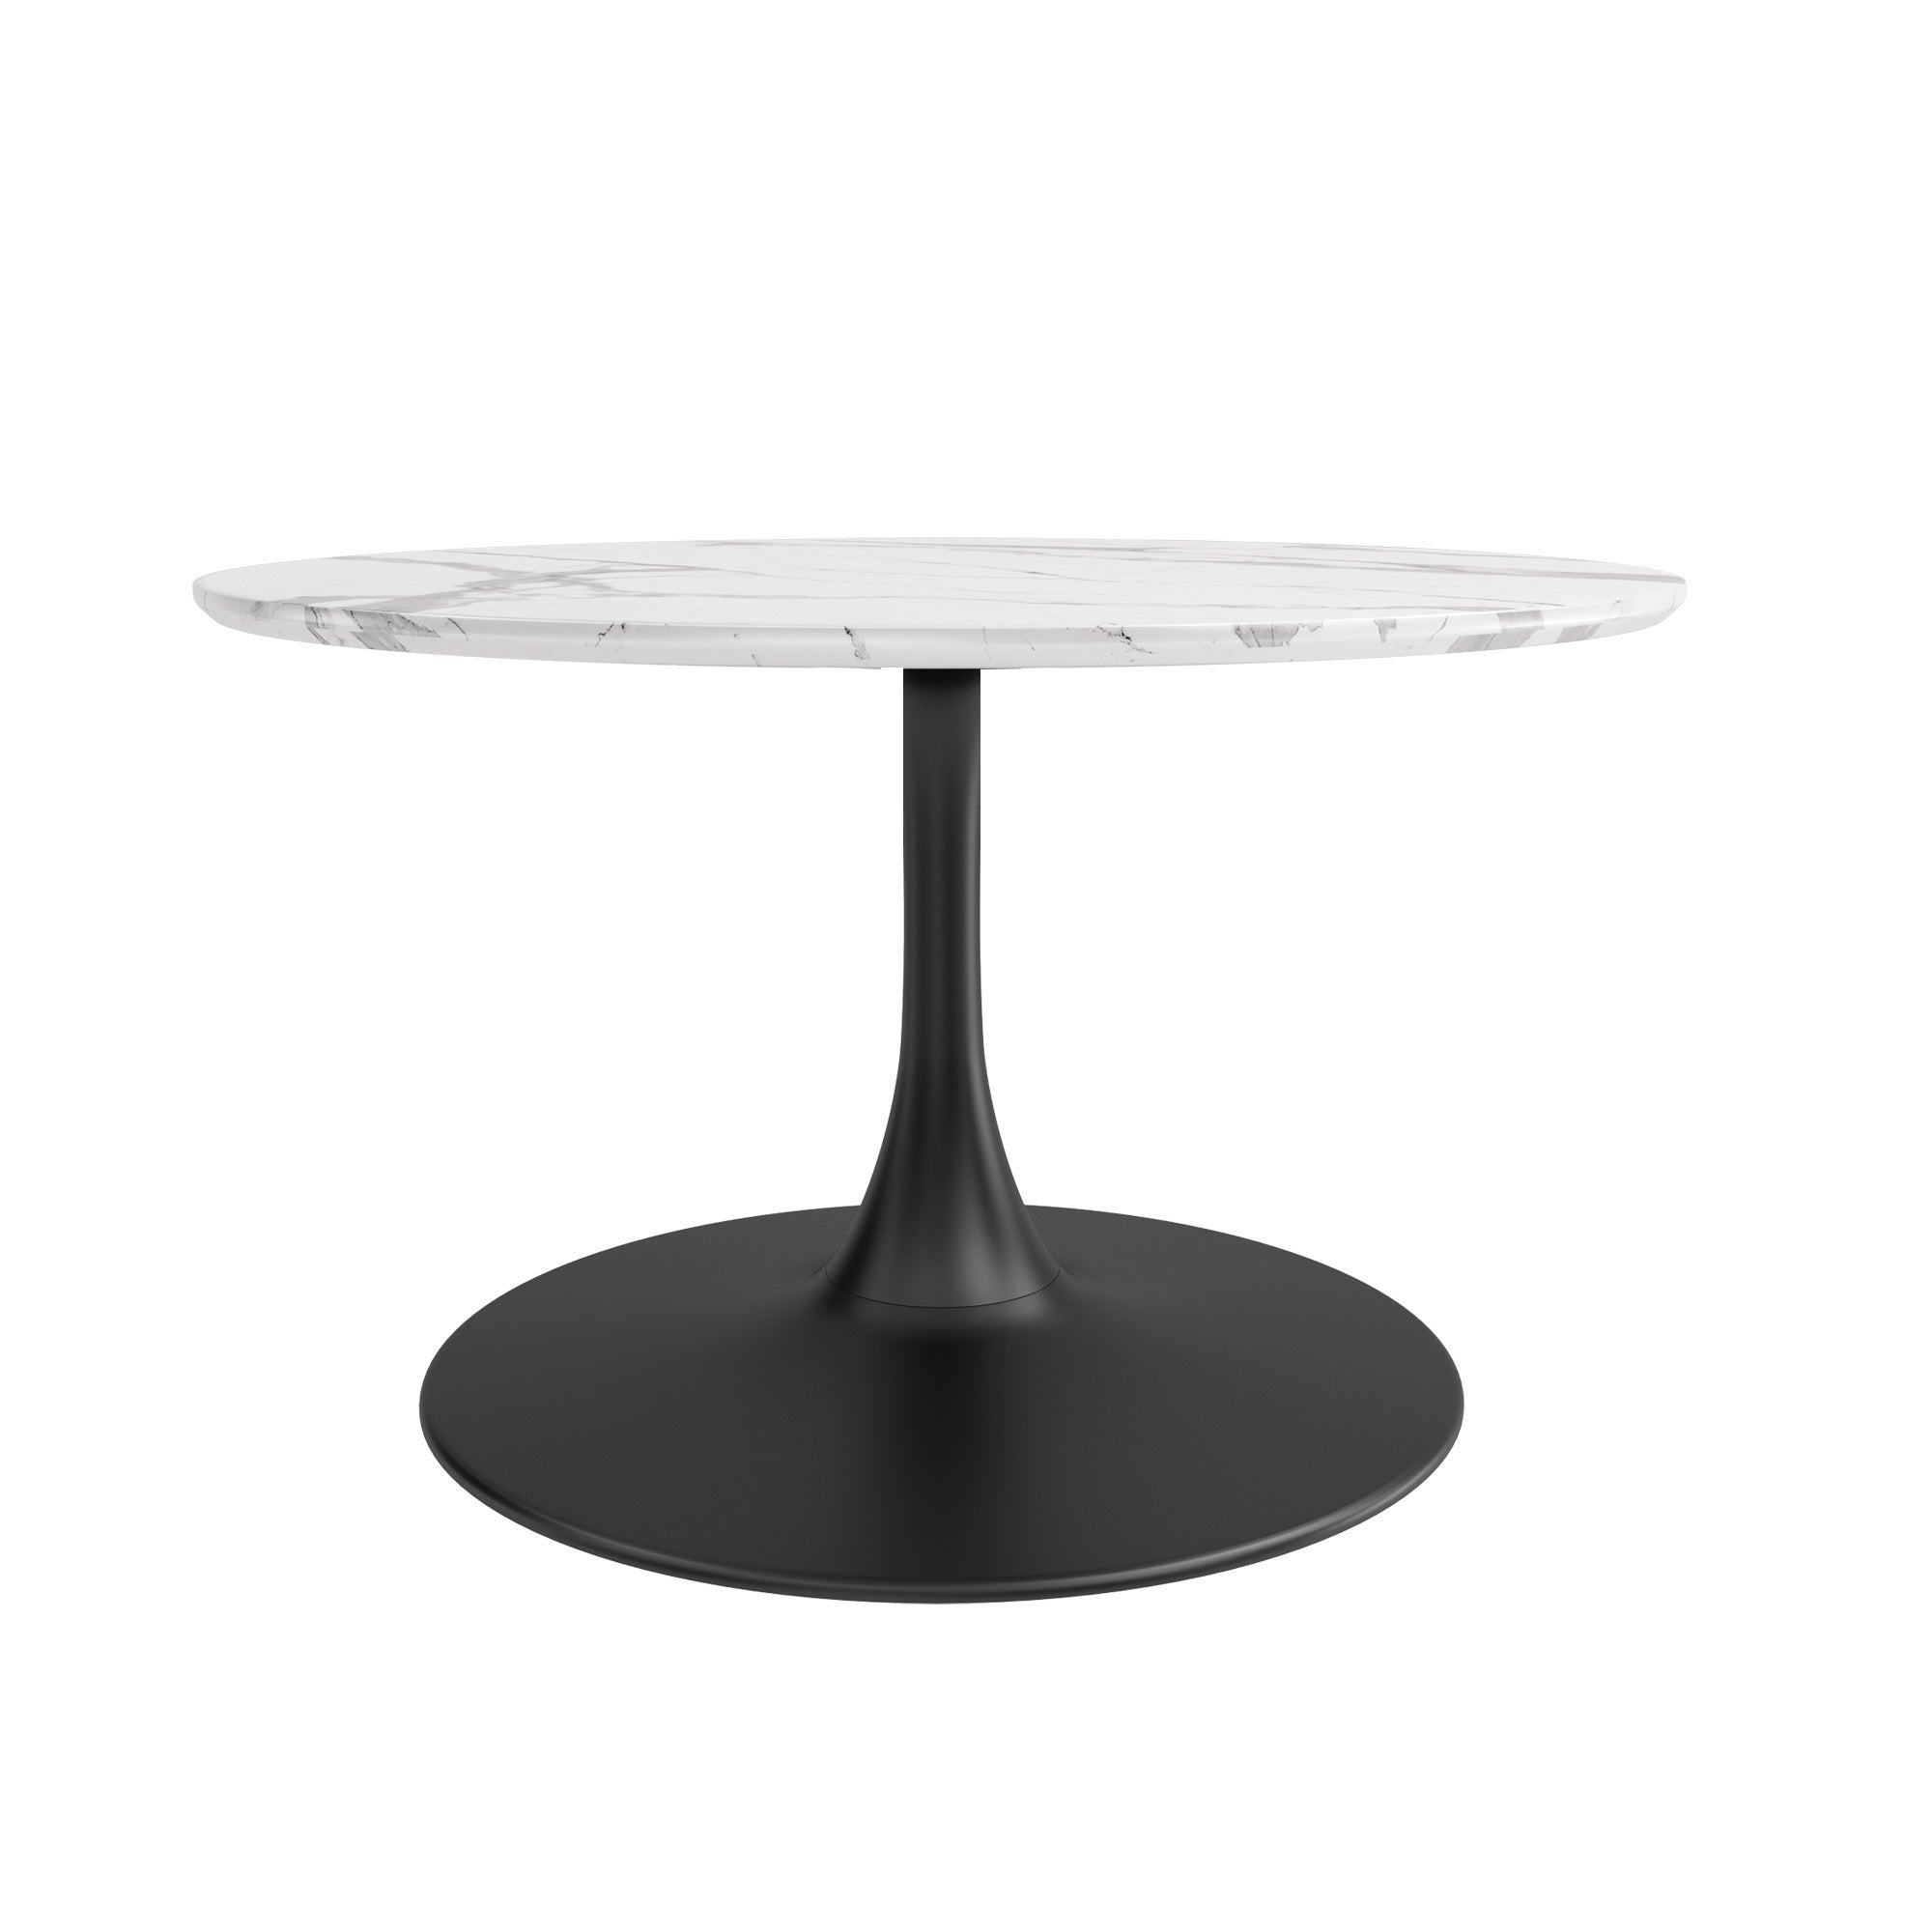 Kurv™ Series Coffee Table 31.5"- White Faux Marble Top and Steel Pedestal Base